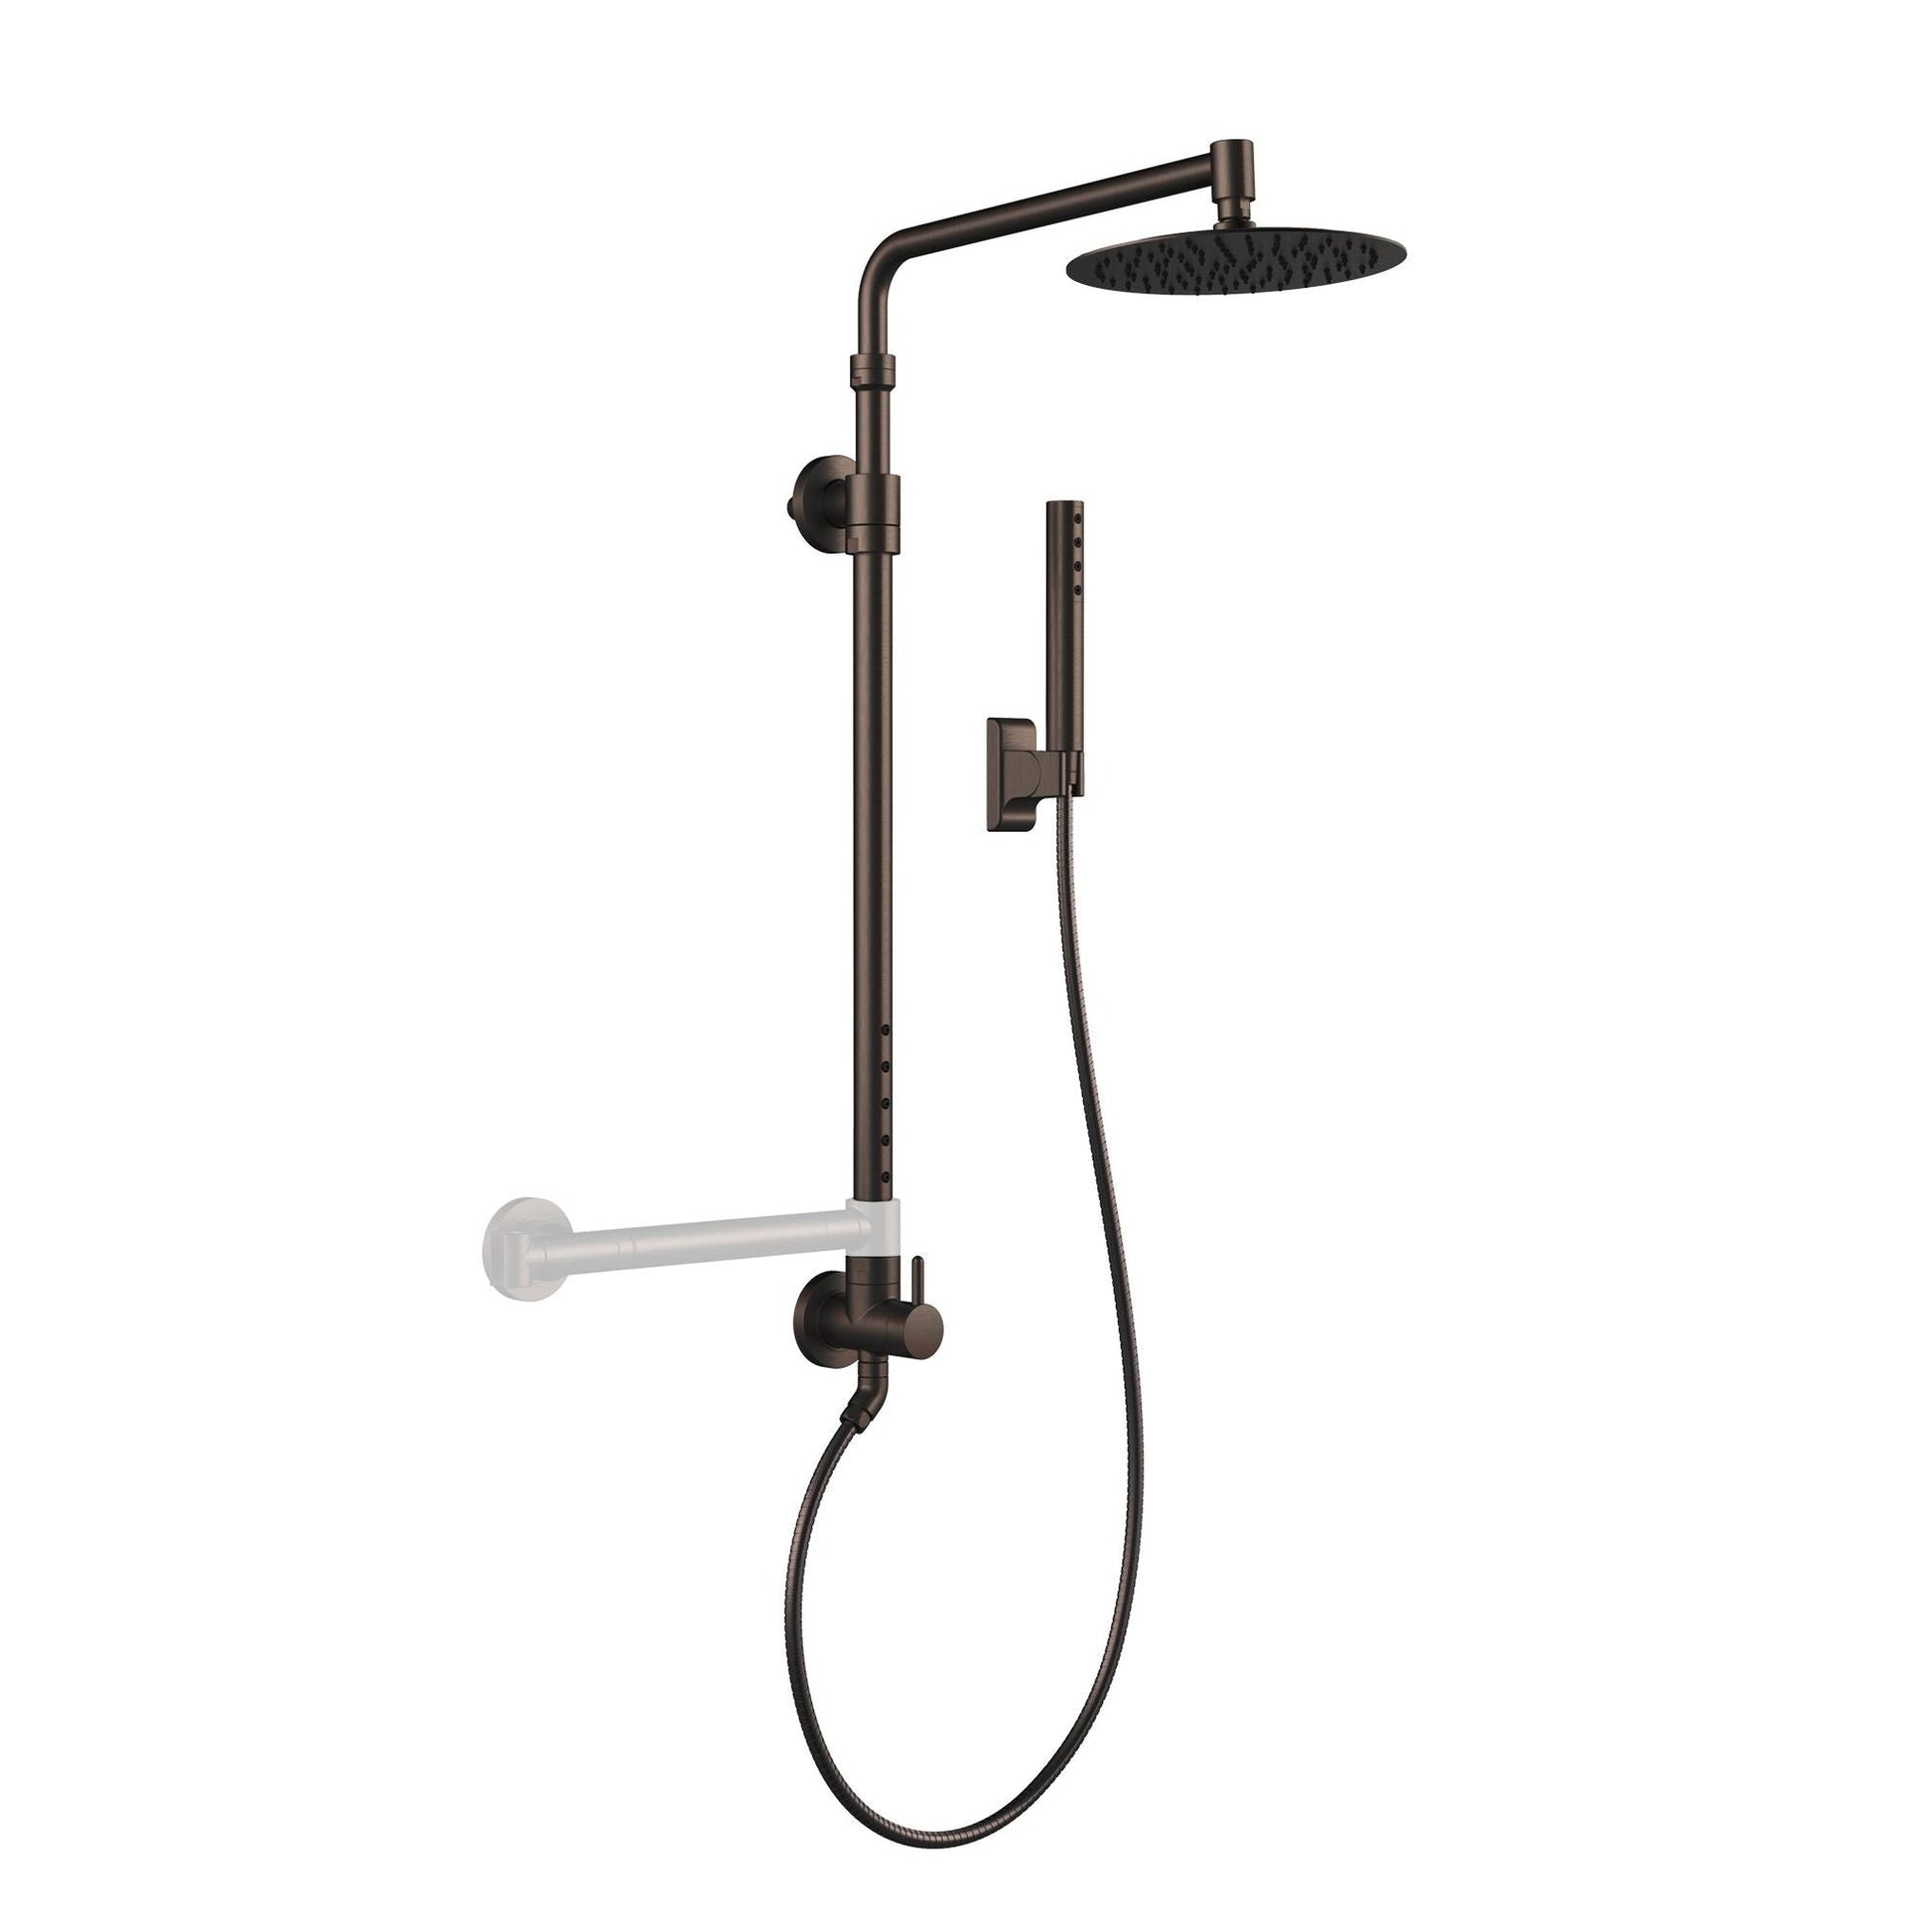 PULSE ShowerSpas Atlantis 1.8 GPM Rain Shower System in Oil Rubbed Bronze Finish With 5-Power Nozzle and Single Function Hand Shower